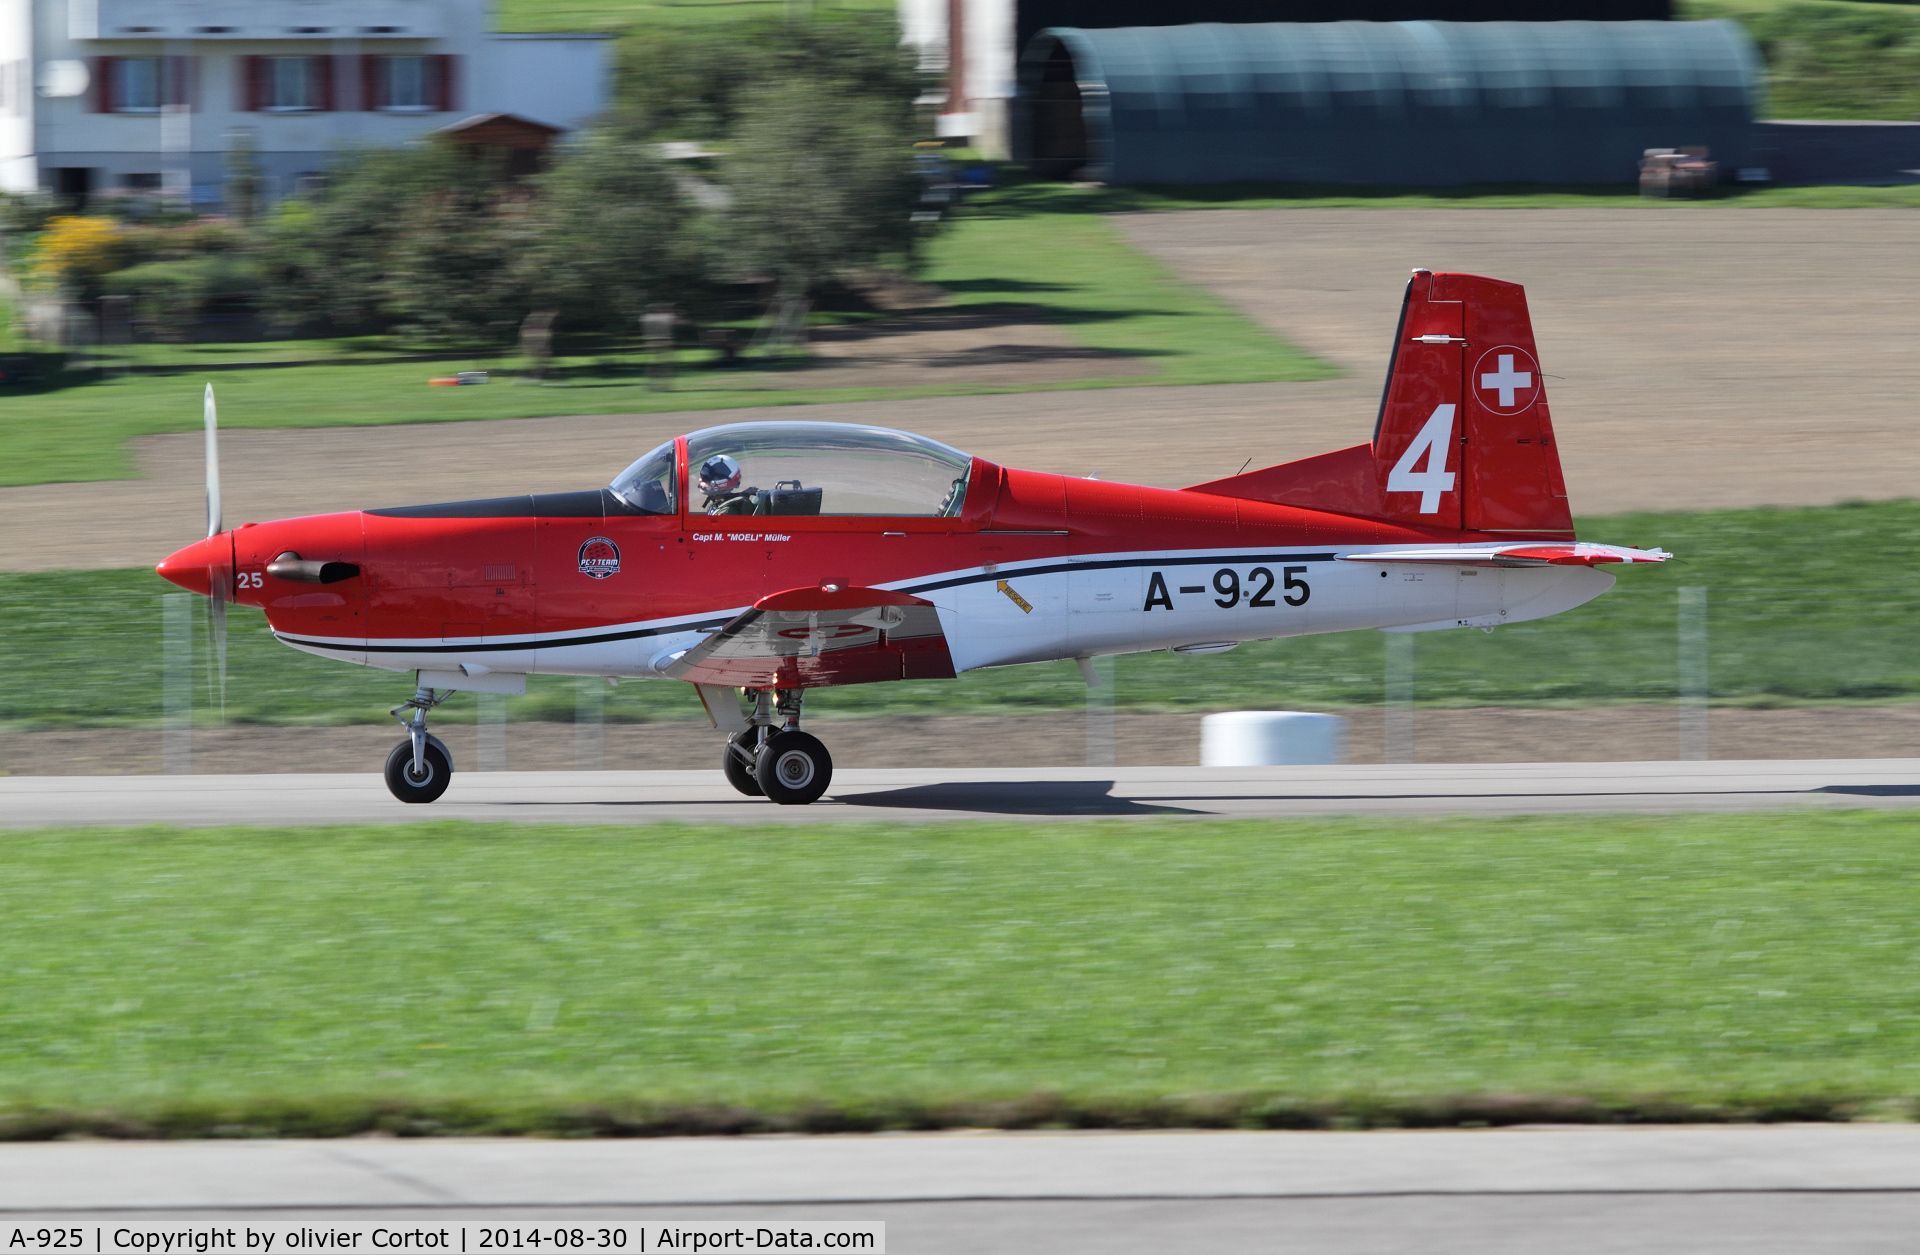 A-925, 1983 Pilatus PC-7 Turbo Trainer C/N 333, landing afther the show, Air 14